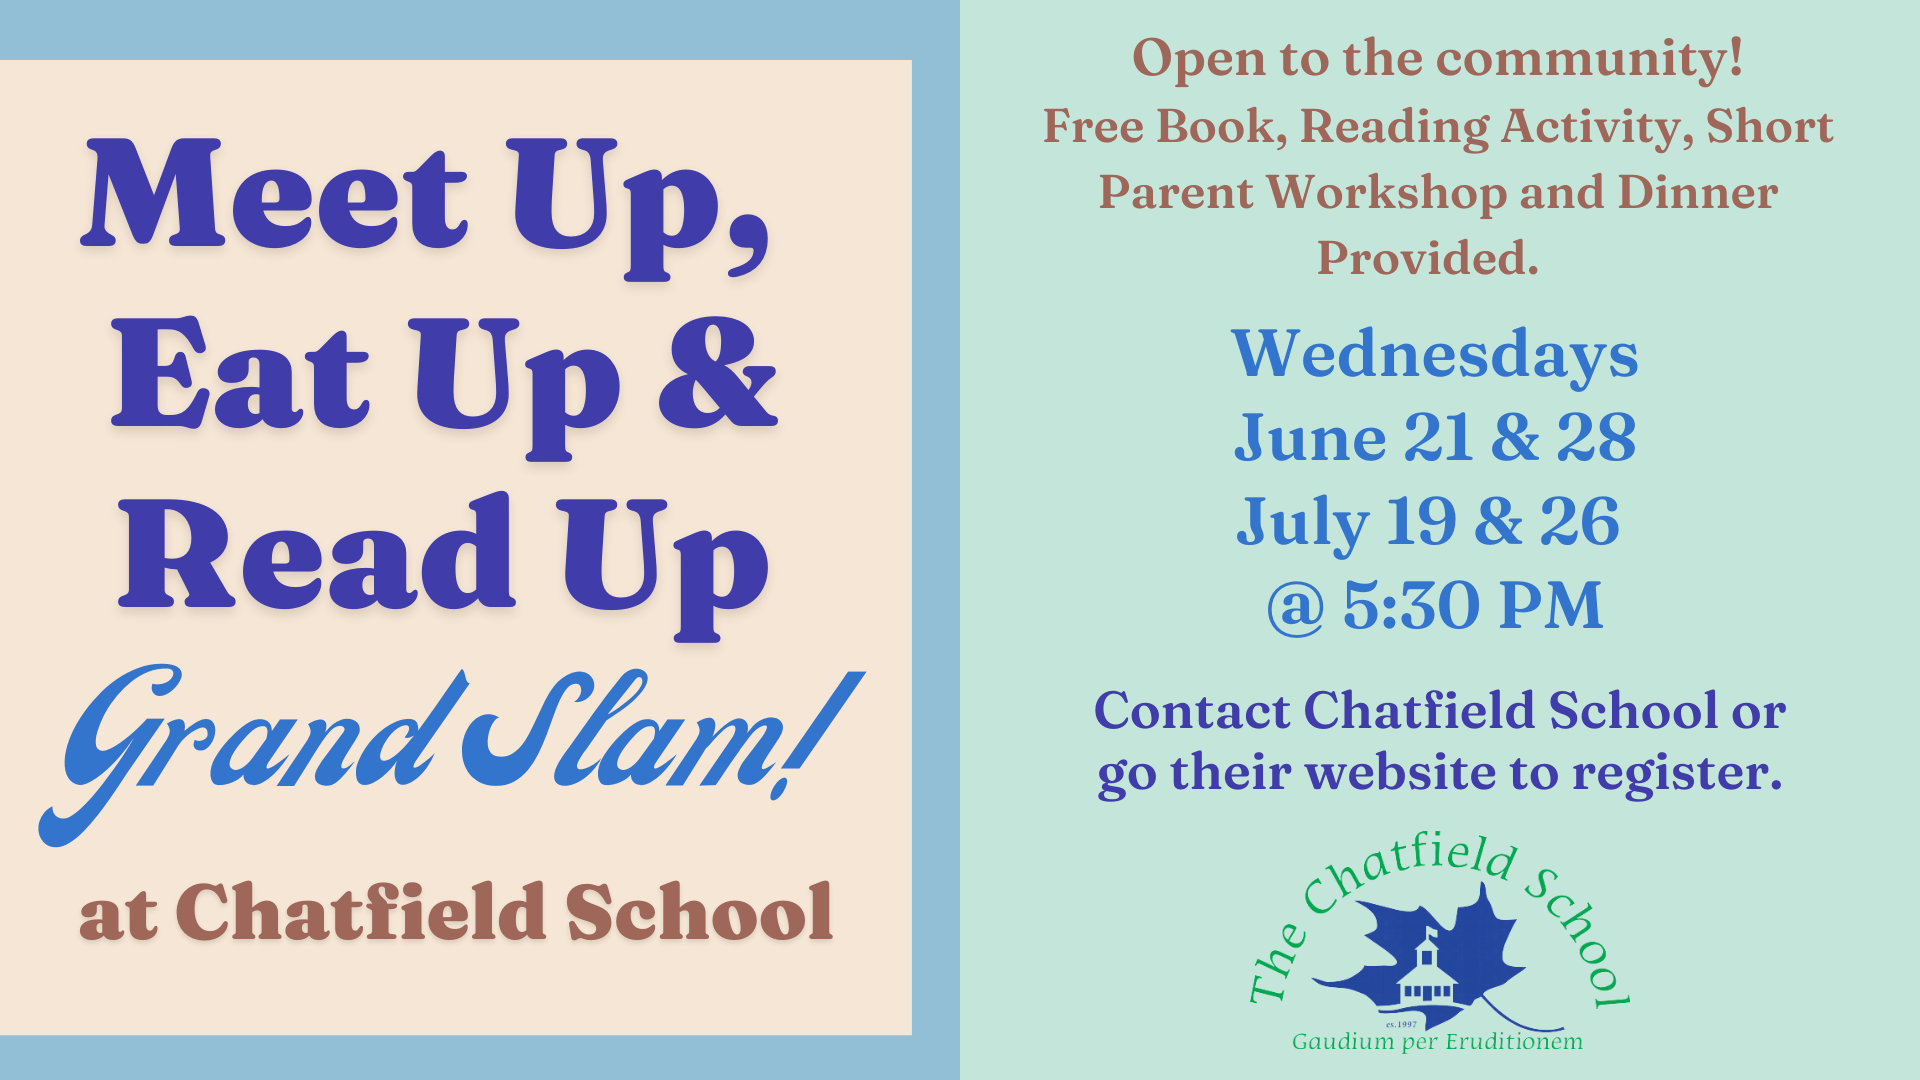 Meet Up,  Eat Up & Read Up Grand Slam! Open to the community! Free Book, Reading Activity, Short Parent Workshop and Dinner Provided. Wednesdays June 21 & 28 July 19 & 26  @ 5:30 PM at Chatfield School Contact Chatfield School or  go their website to register.